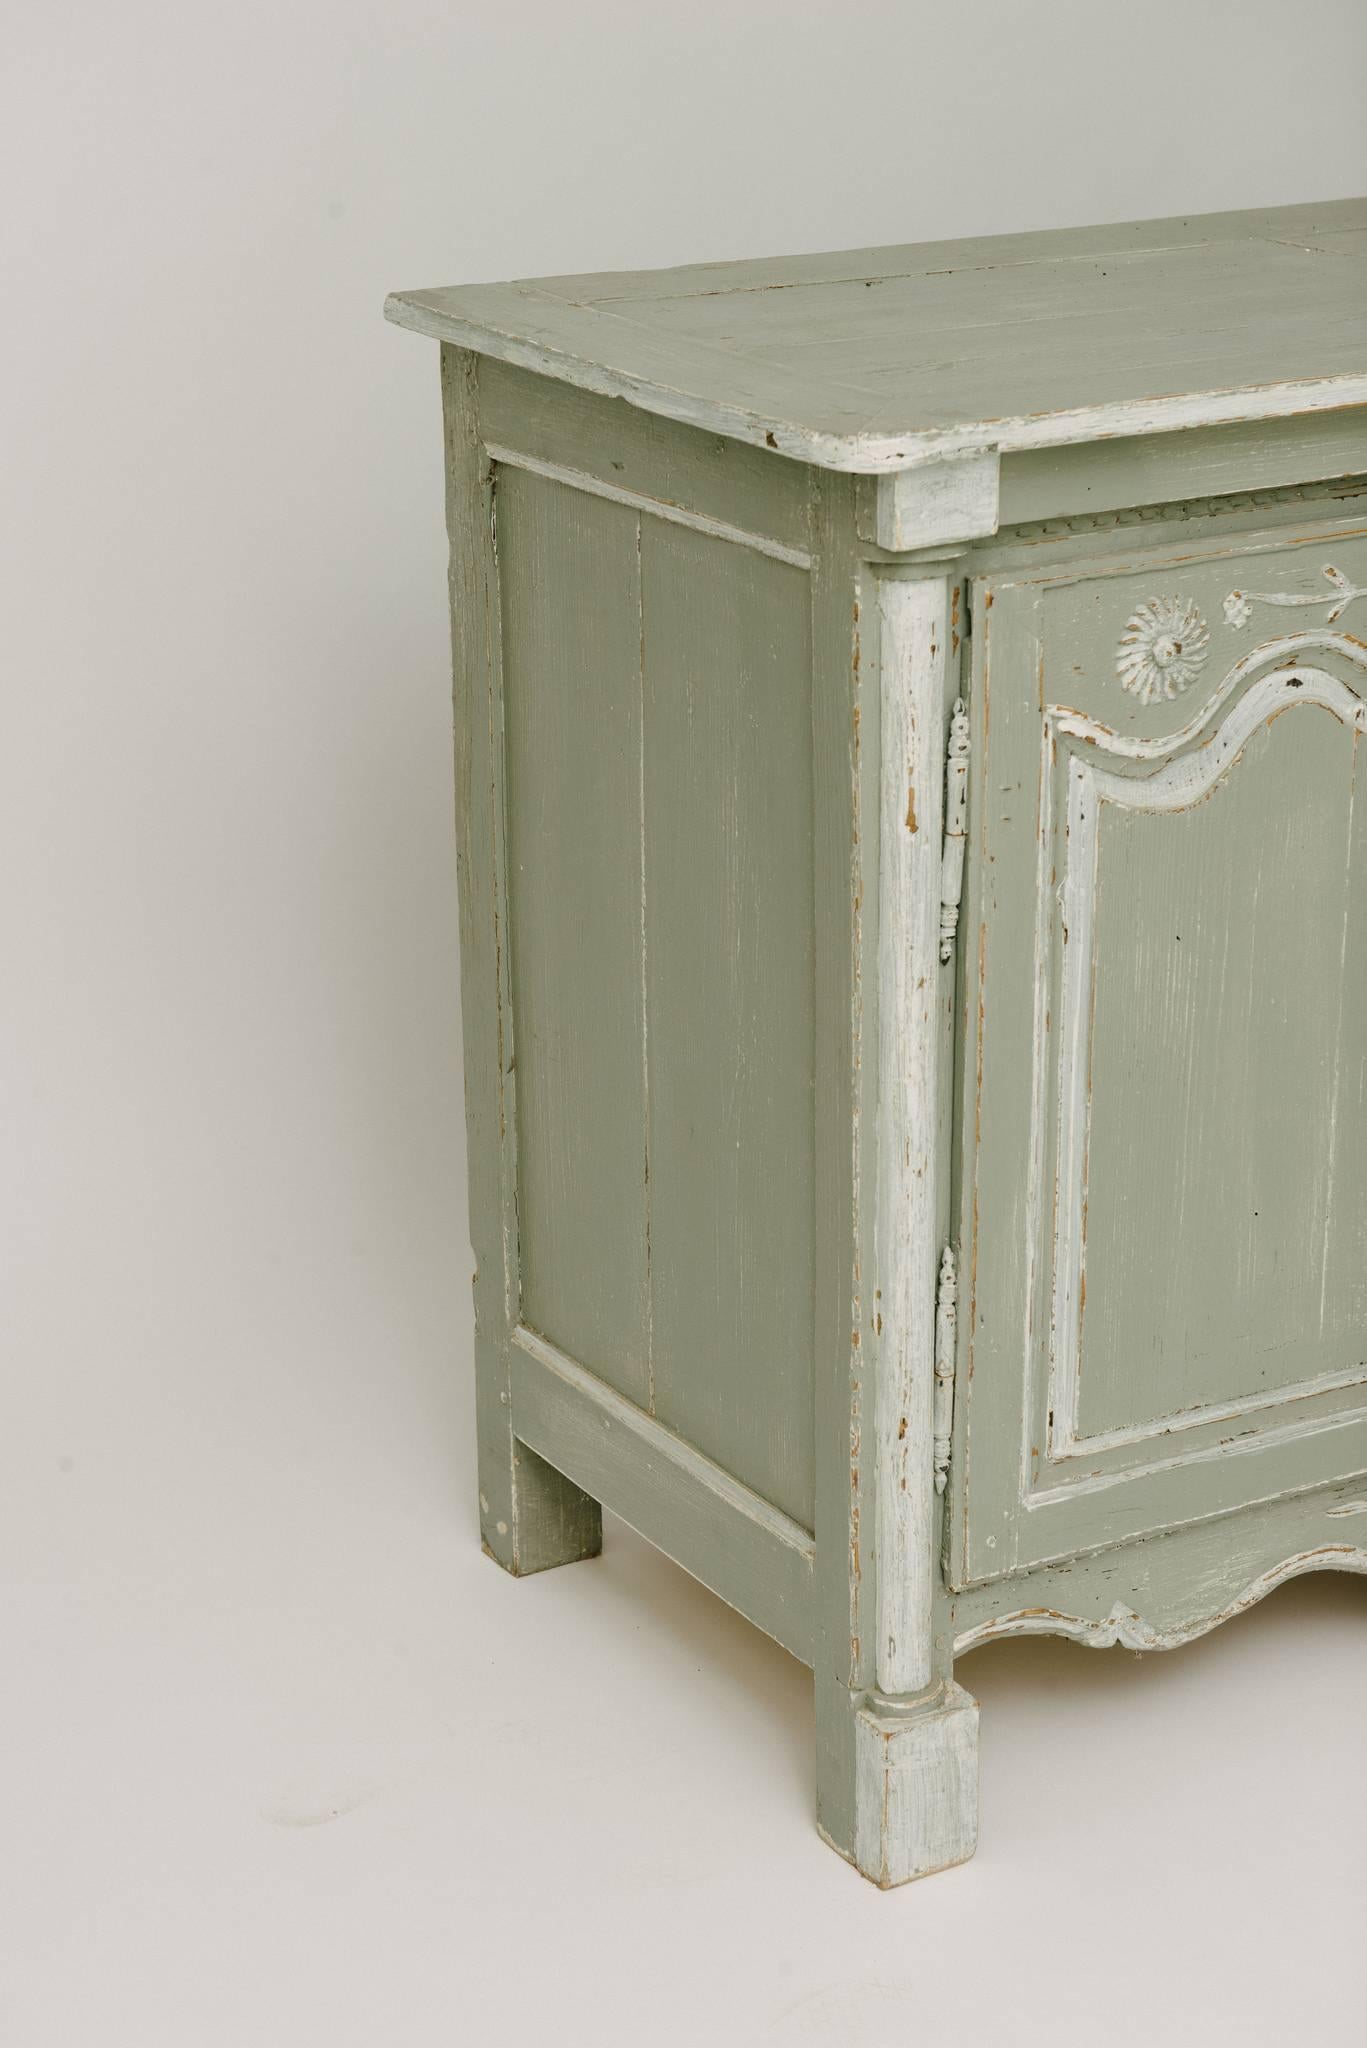 Lovely 18th century French Louis XV buffet from Avignon painted a beautiful gray-green color.